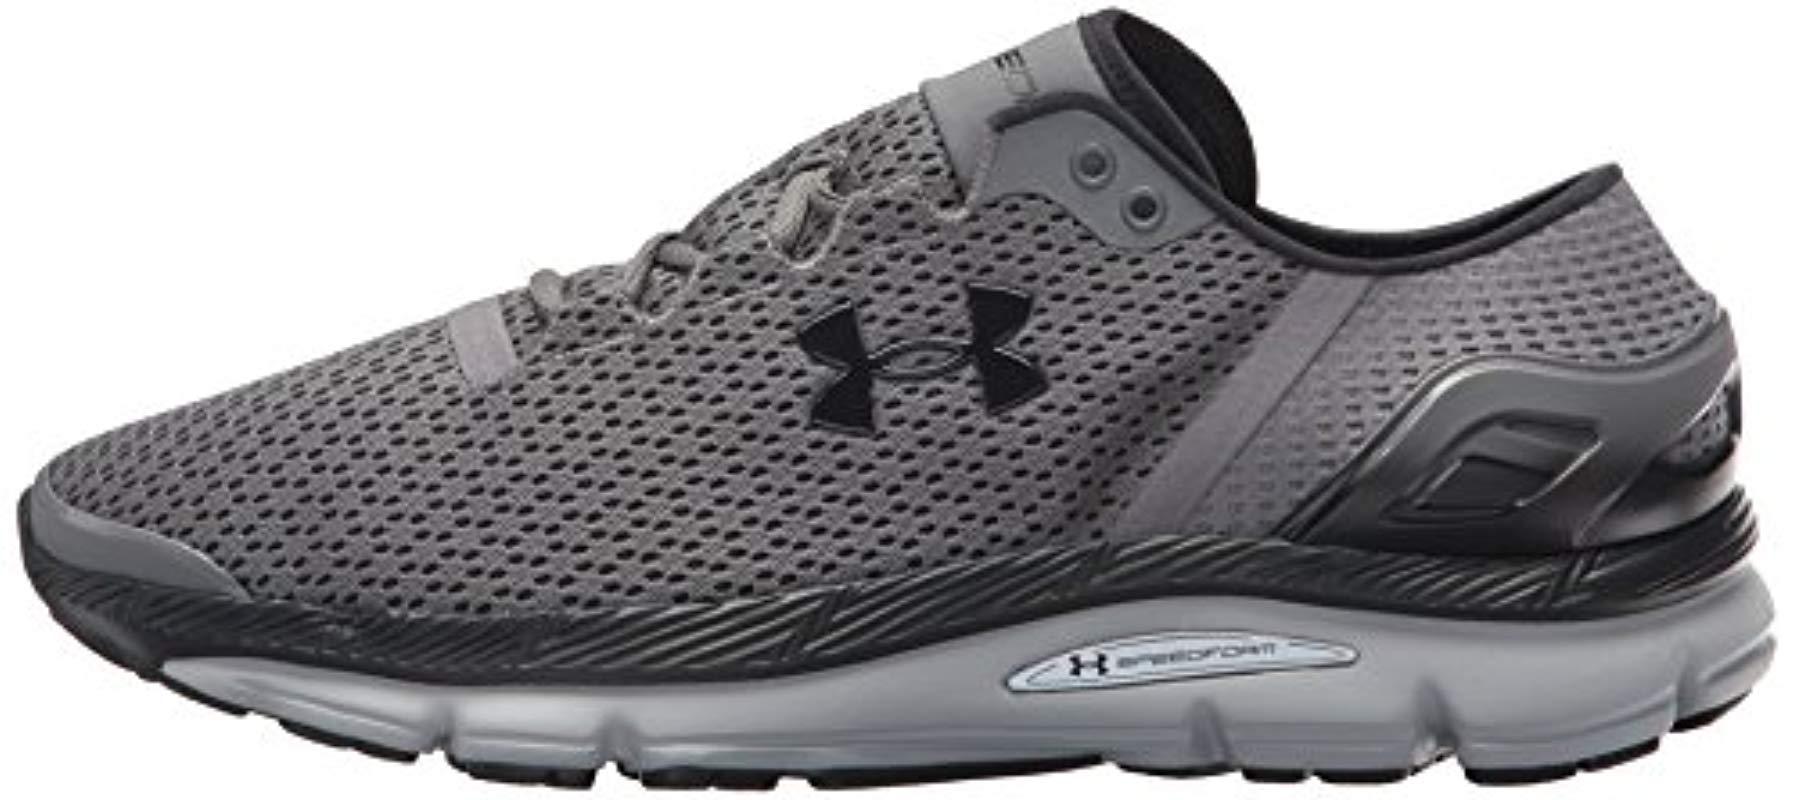 Under Armour Speedfoam Intake 2 Mens Running Shoes Black Cushioned Run Trainers 